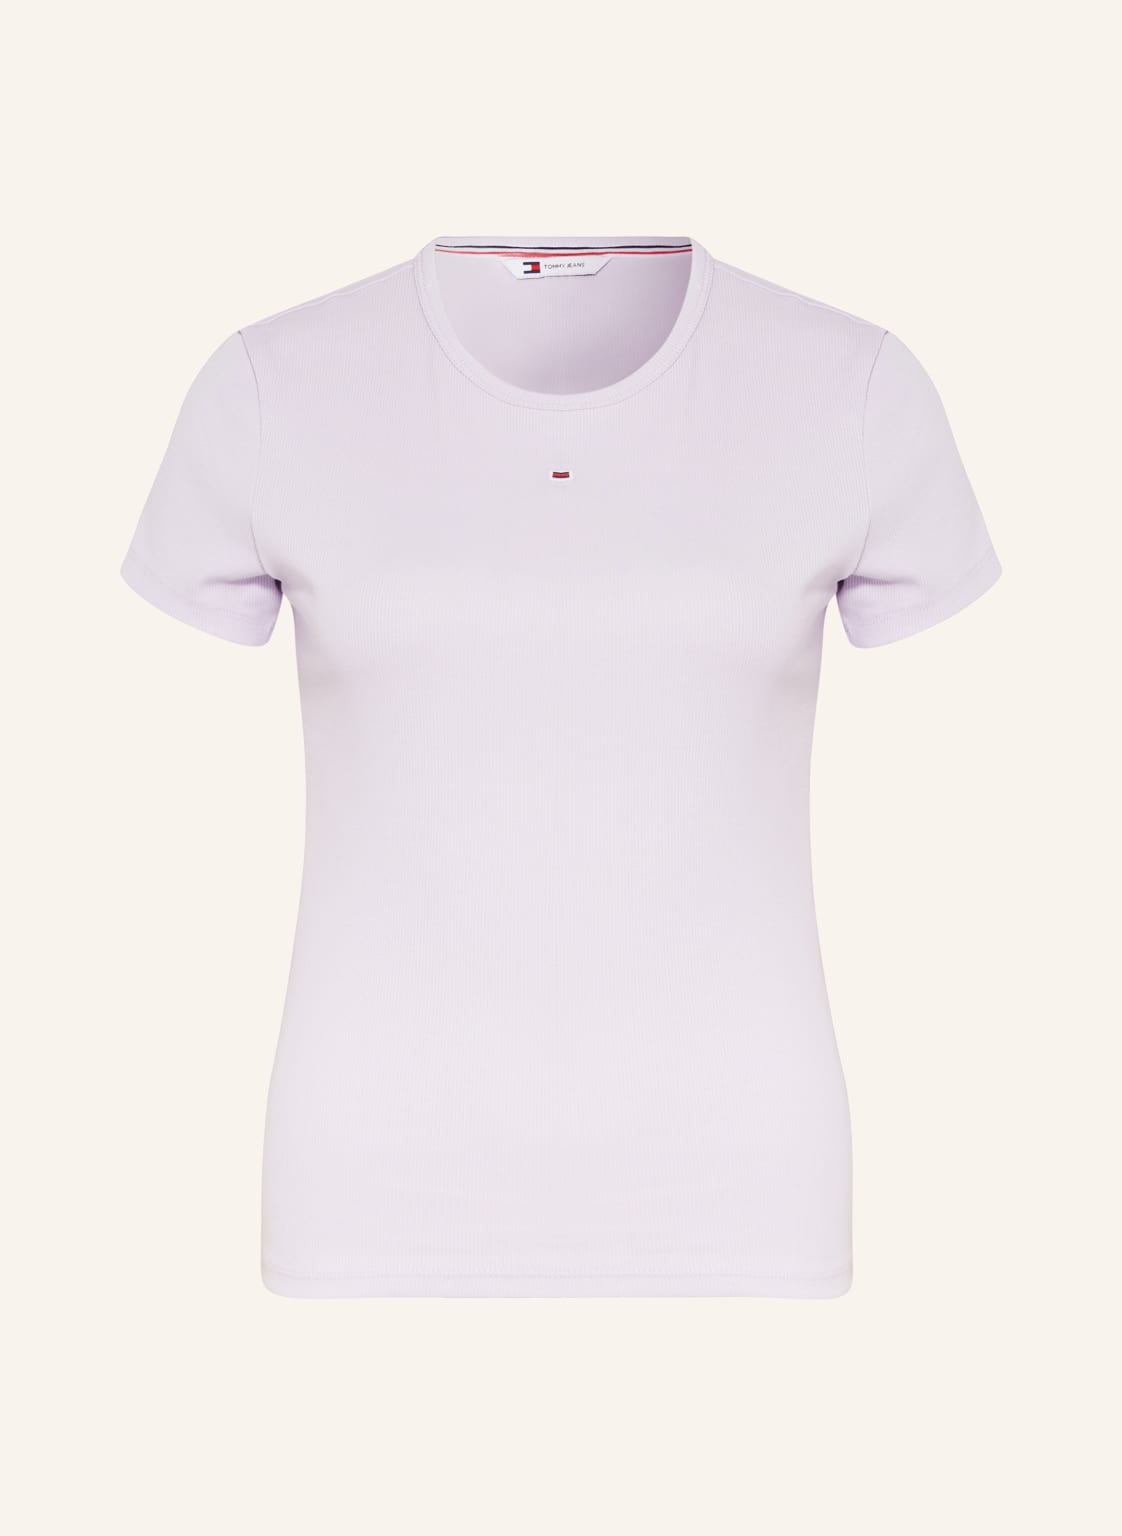 Tommy Jeans T-Shirt lila von Tommy Jeans